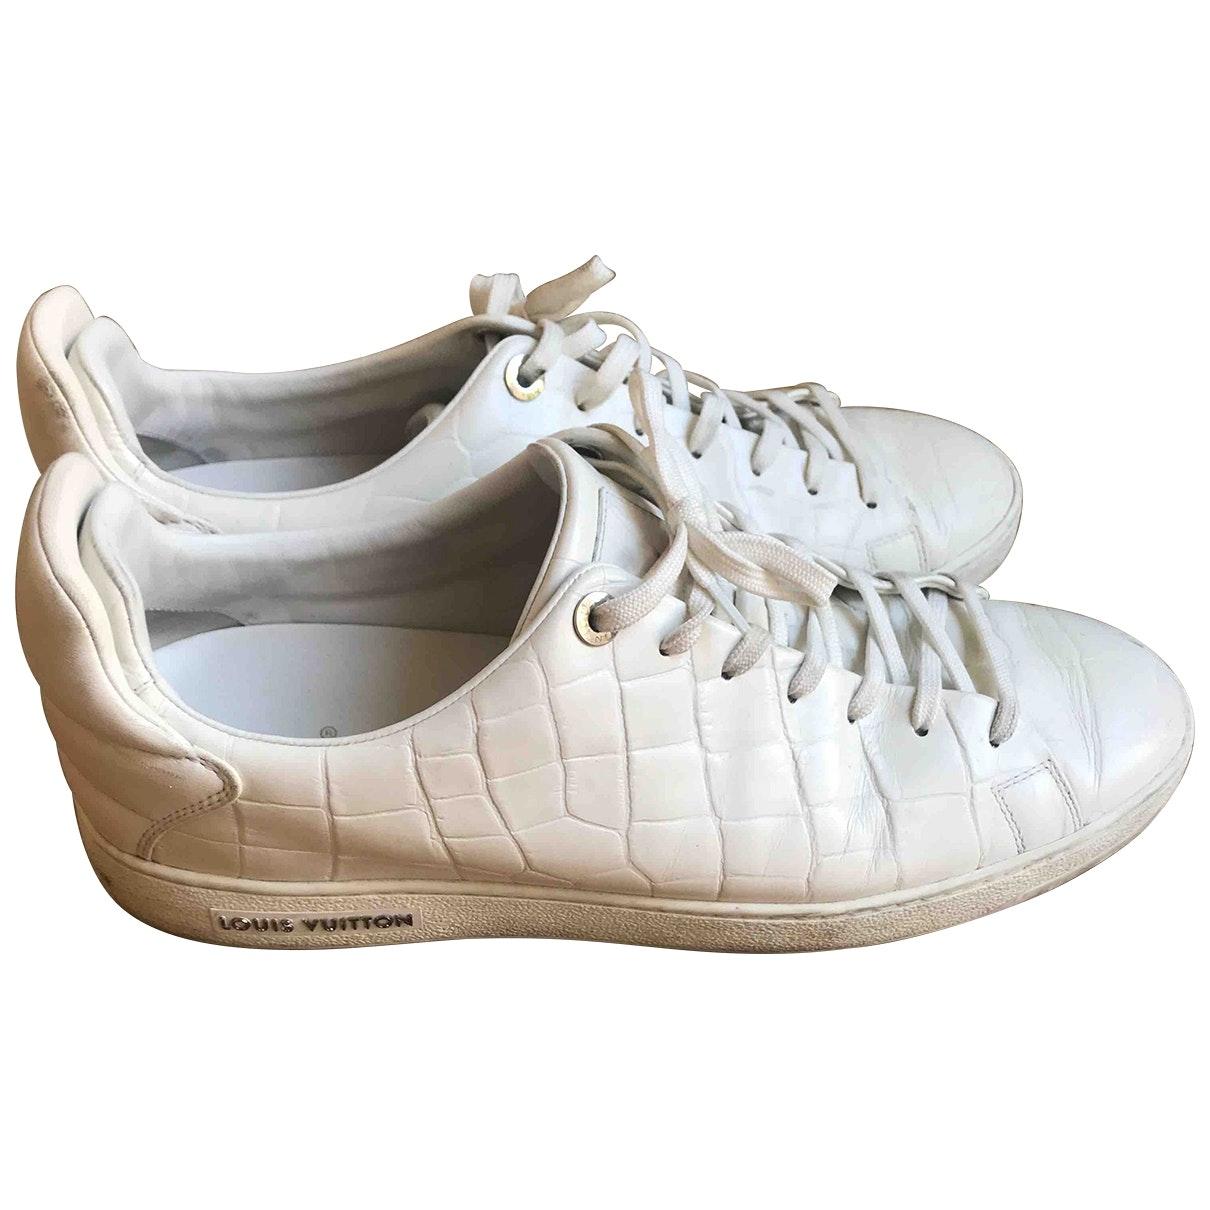 Louis Vuitton Frontrow Leather Low Trainers in White for Men - Lyst